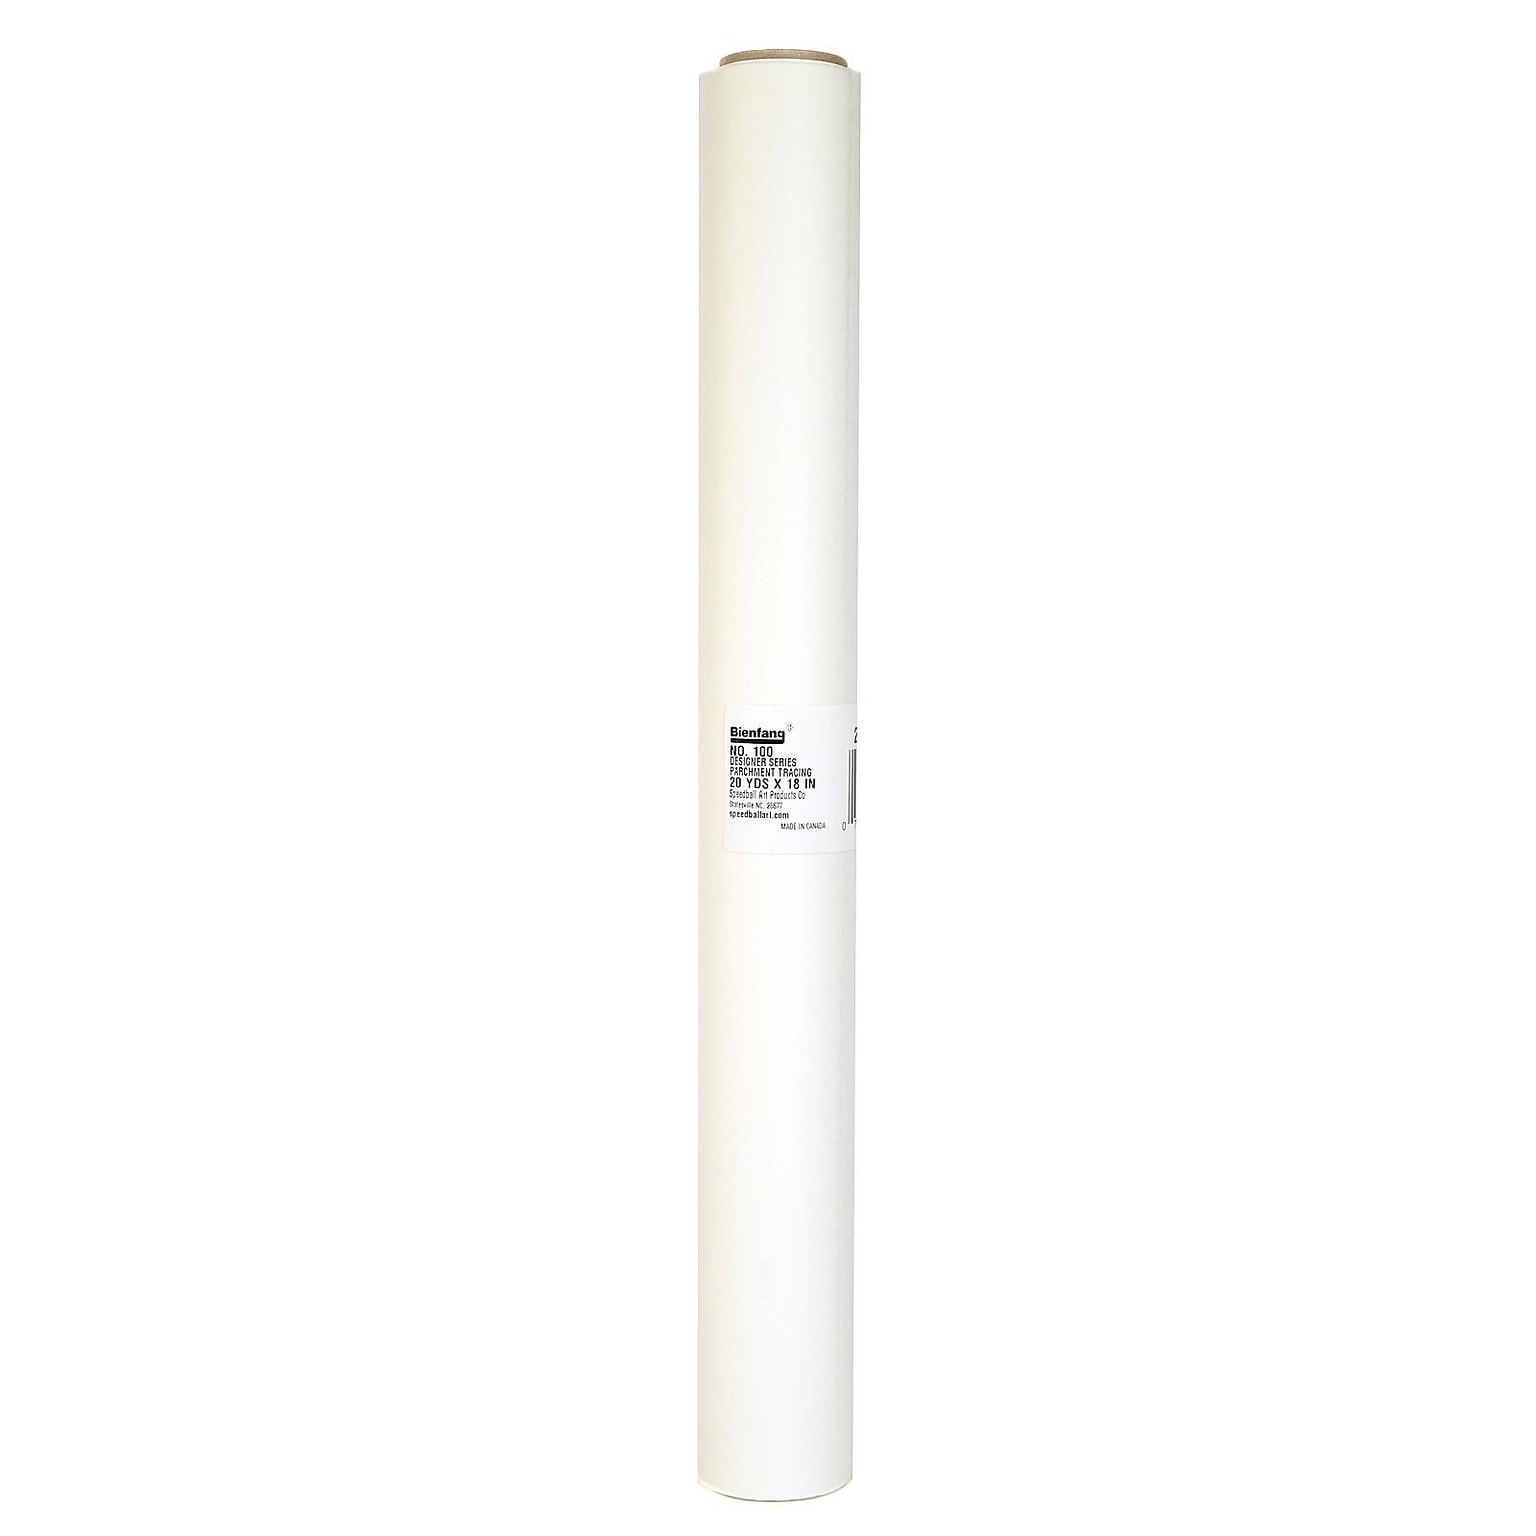 Bienfang Parchment 100 Tracing Paper 18 In. X 20 Yd. Roll (240321)